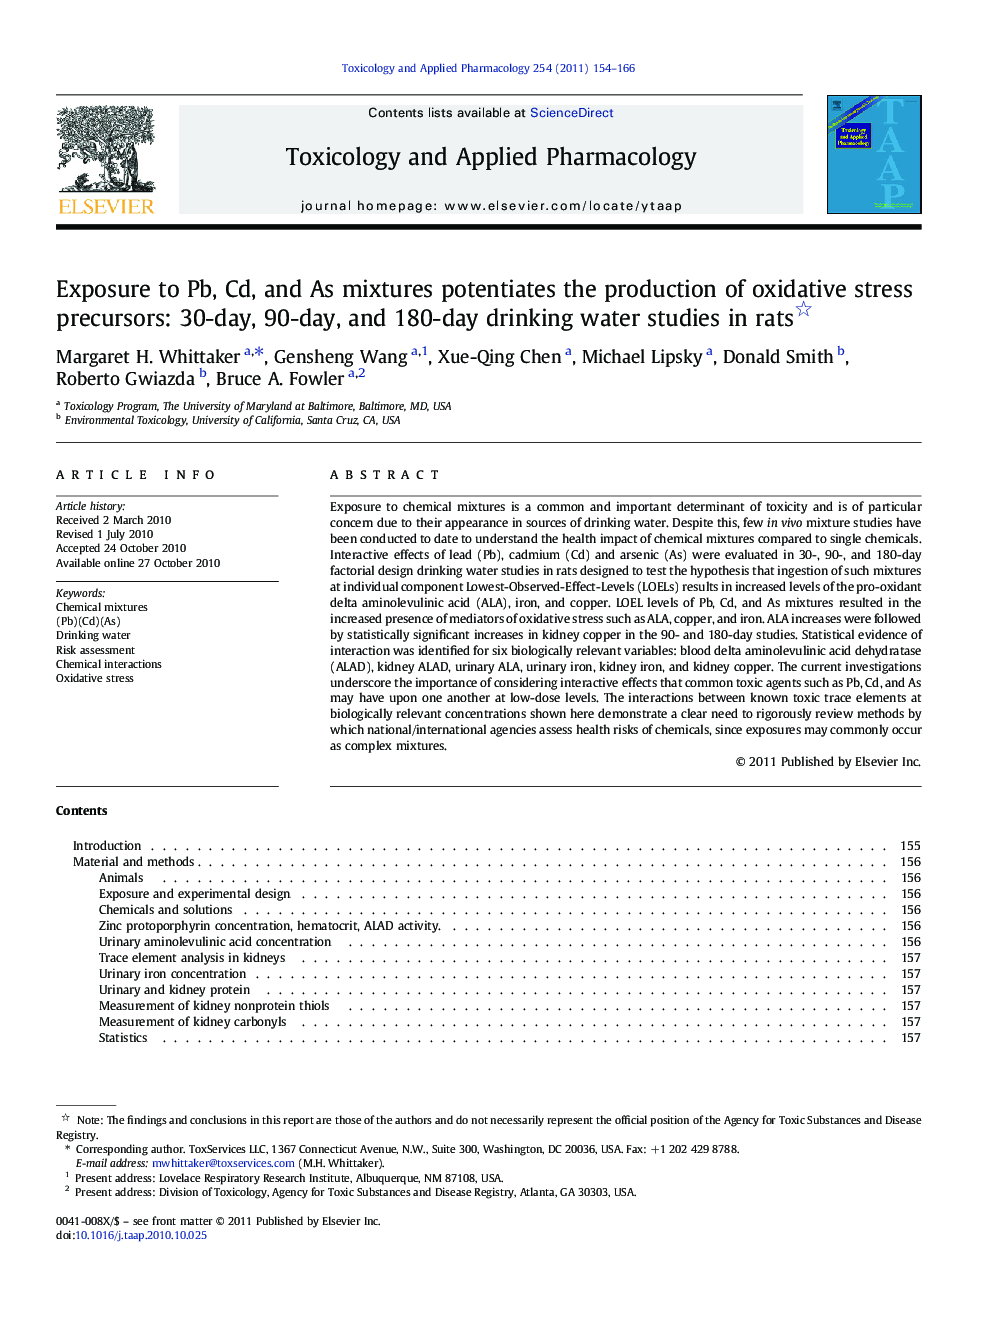 Exposure to Pb, Cd, and As mixtures potentiates the production of oxidative stress precursors: 30-day, 90-day, and 180-day drinking water studies in rats